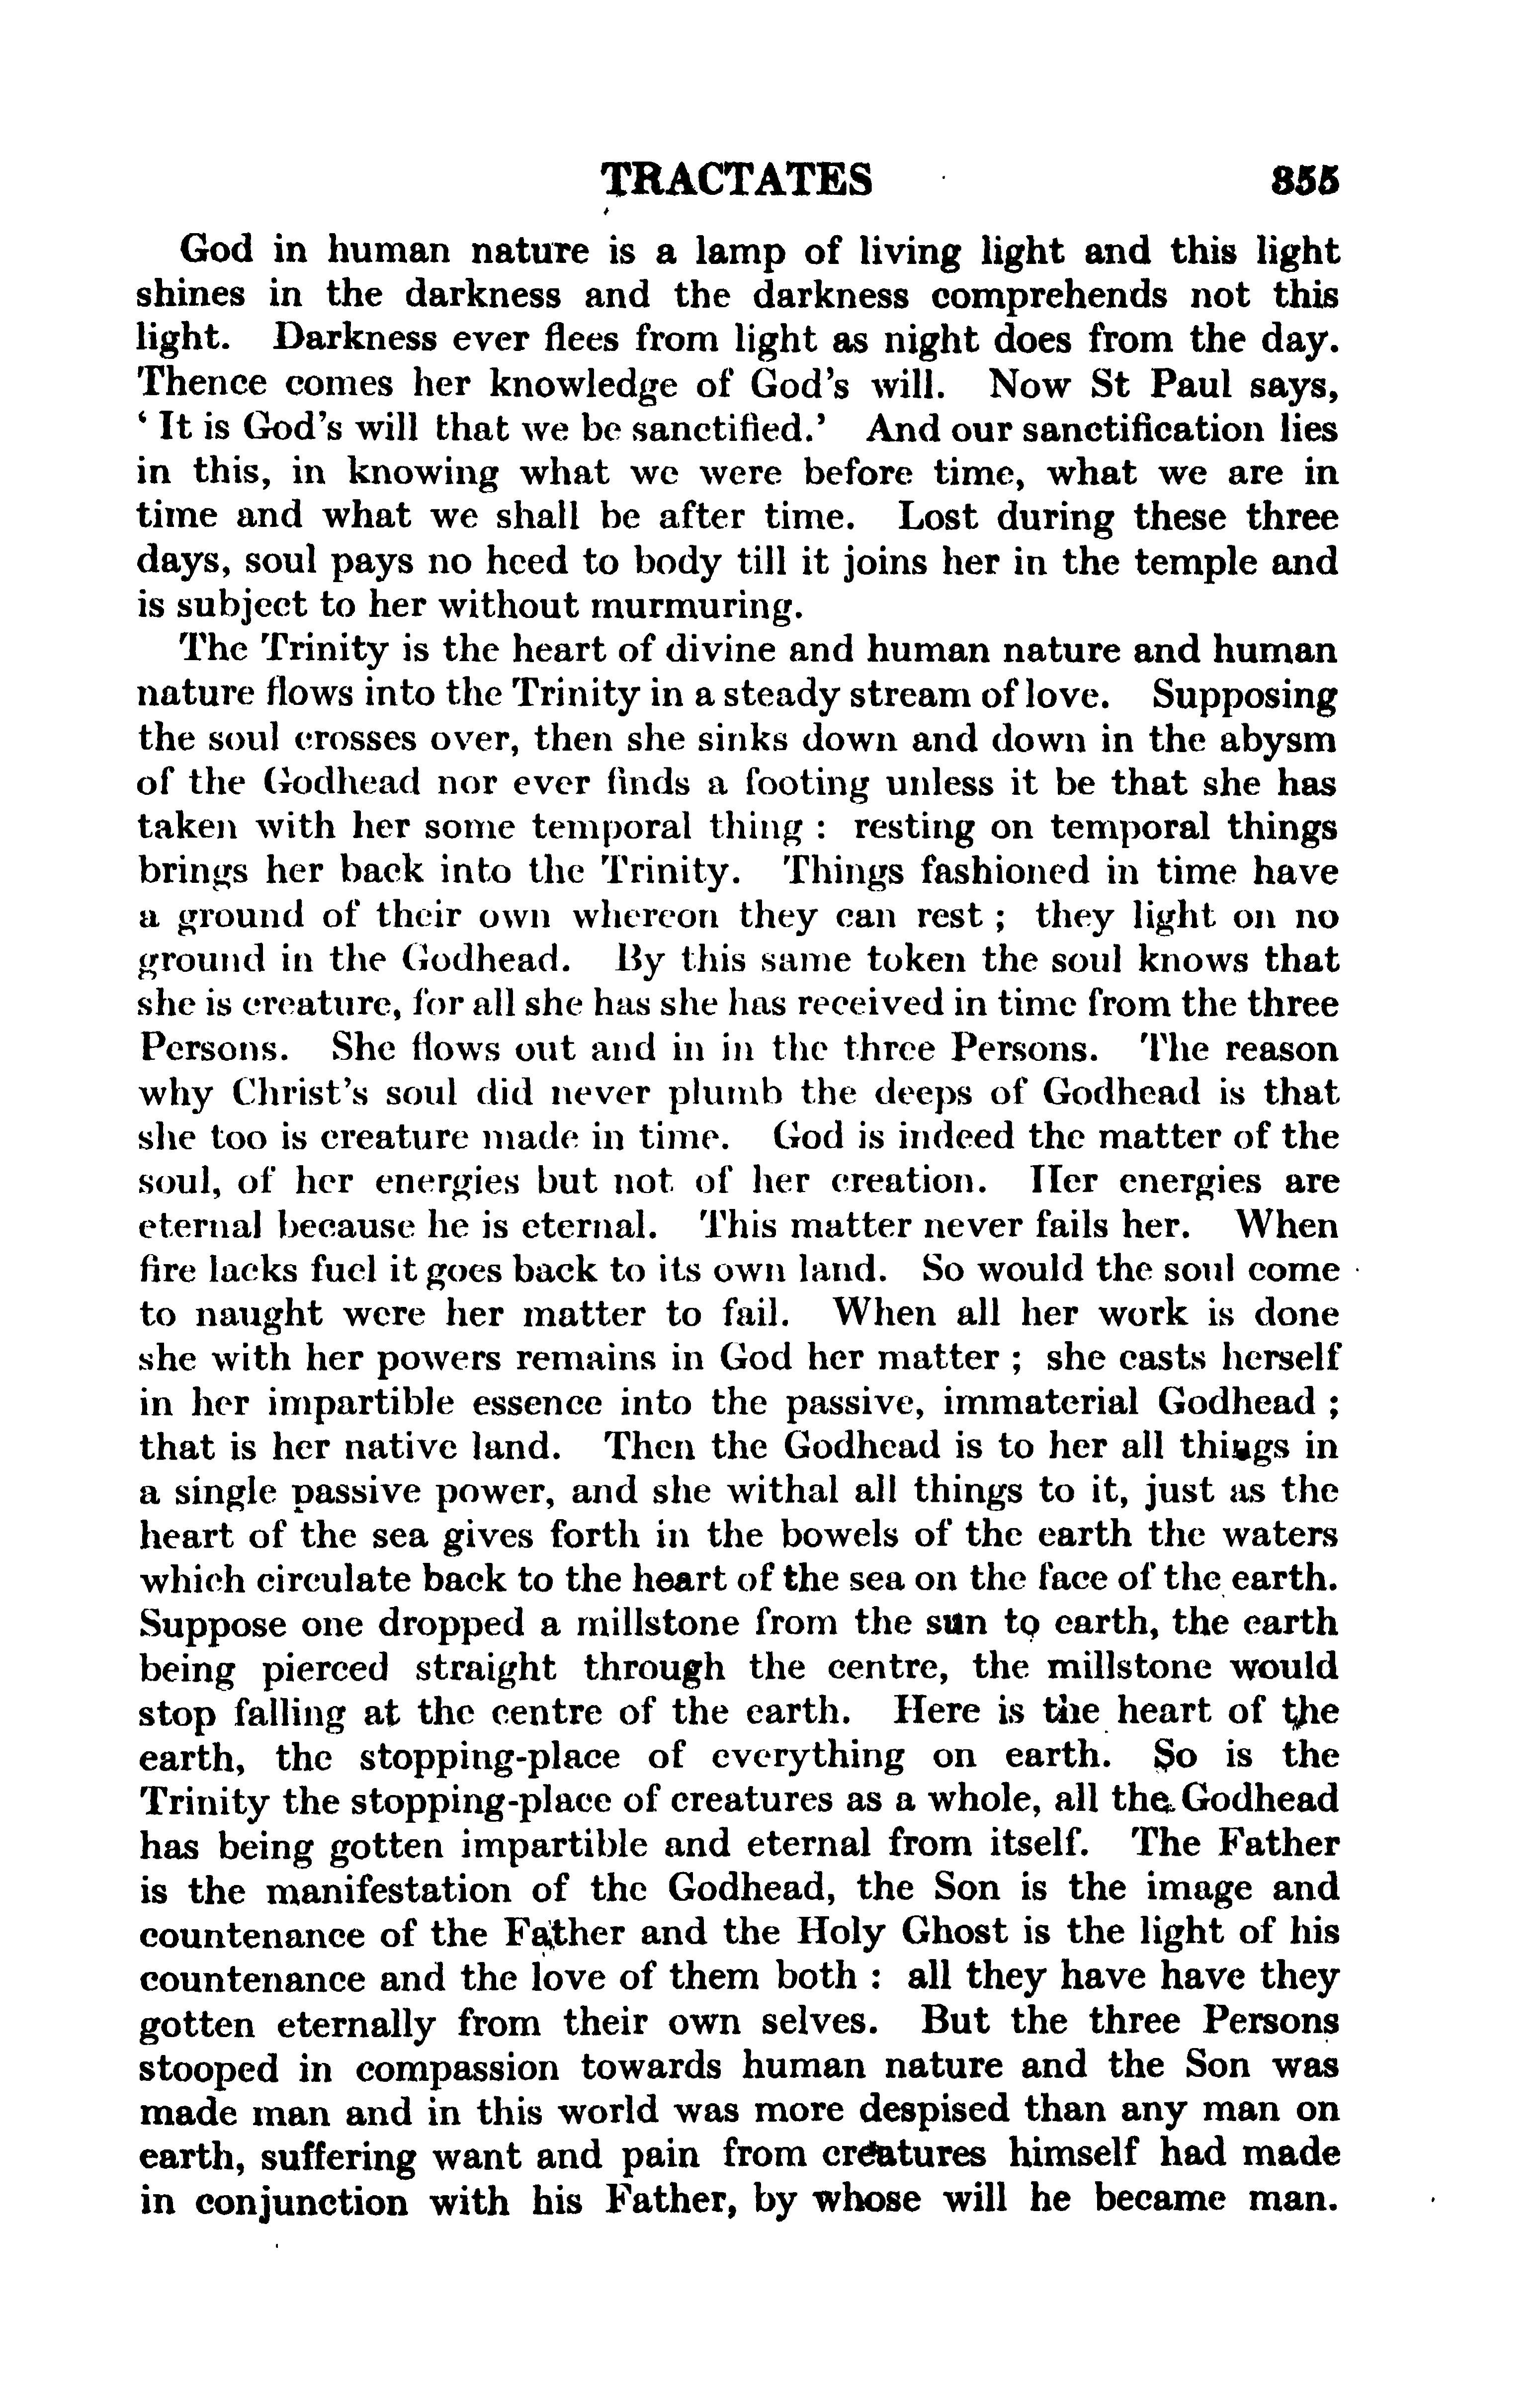 Image of page 0379